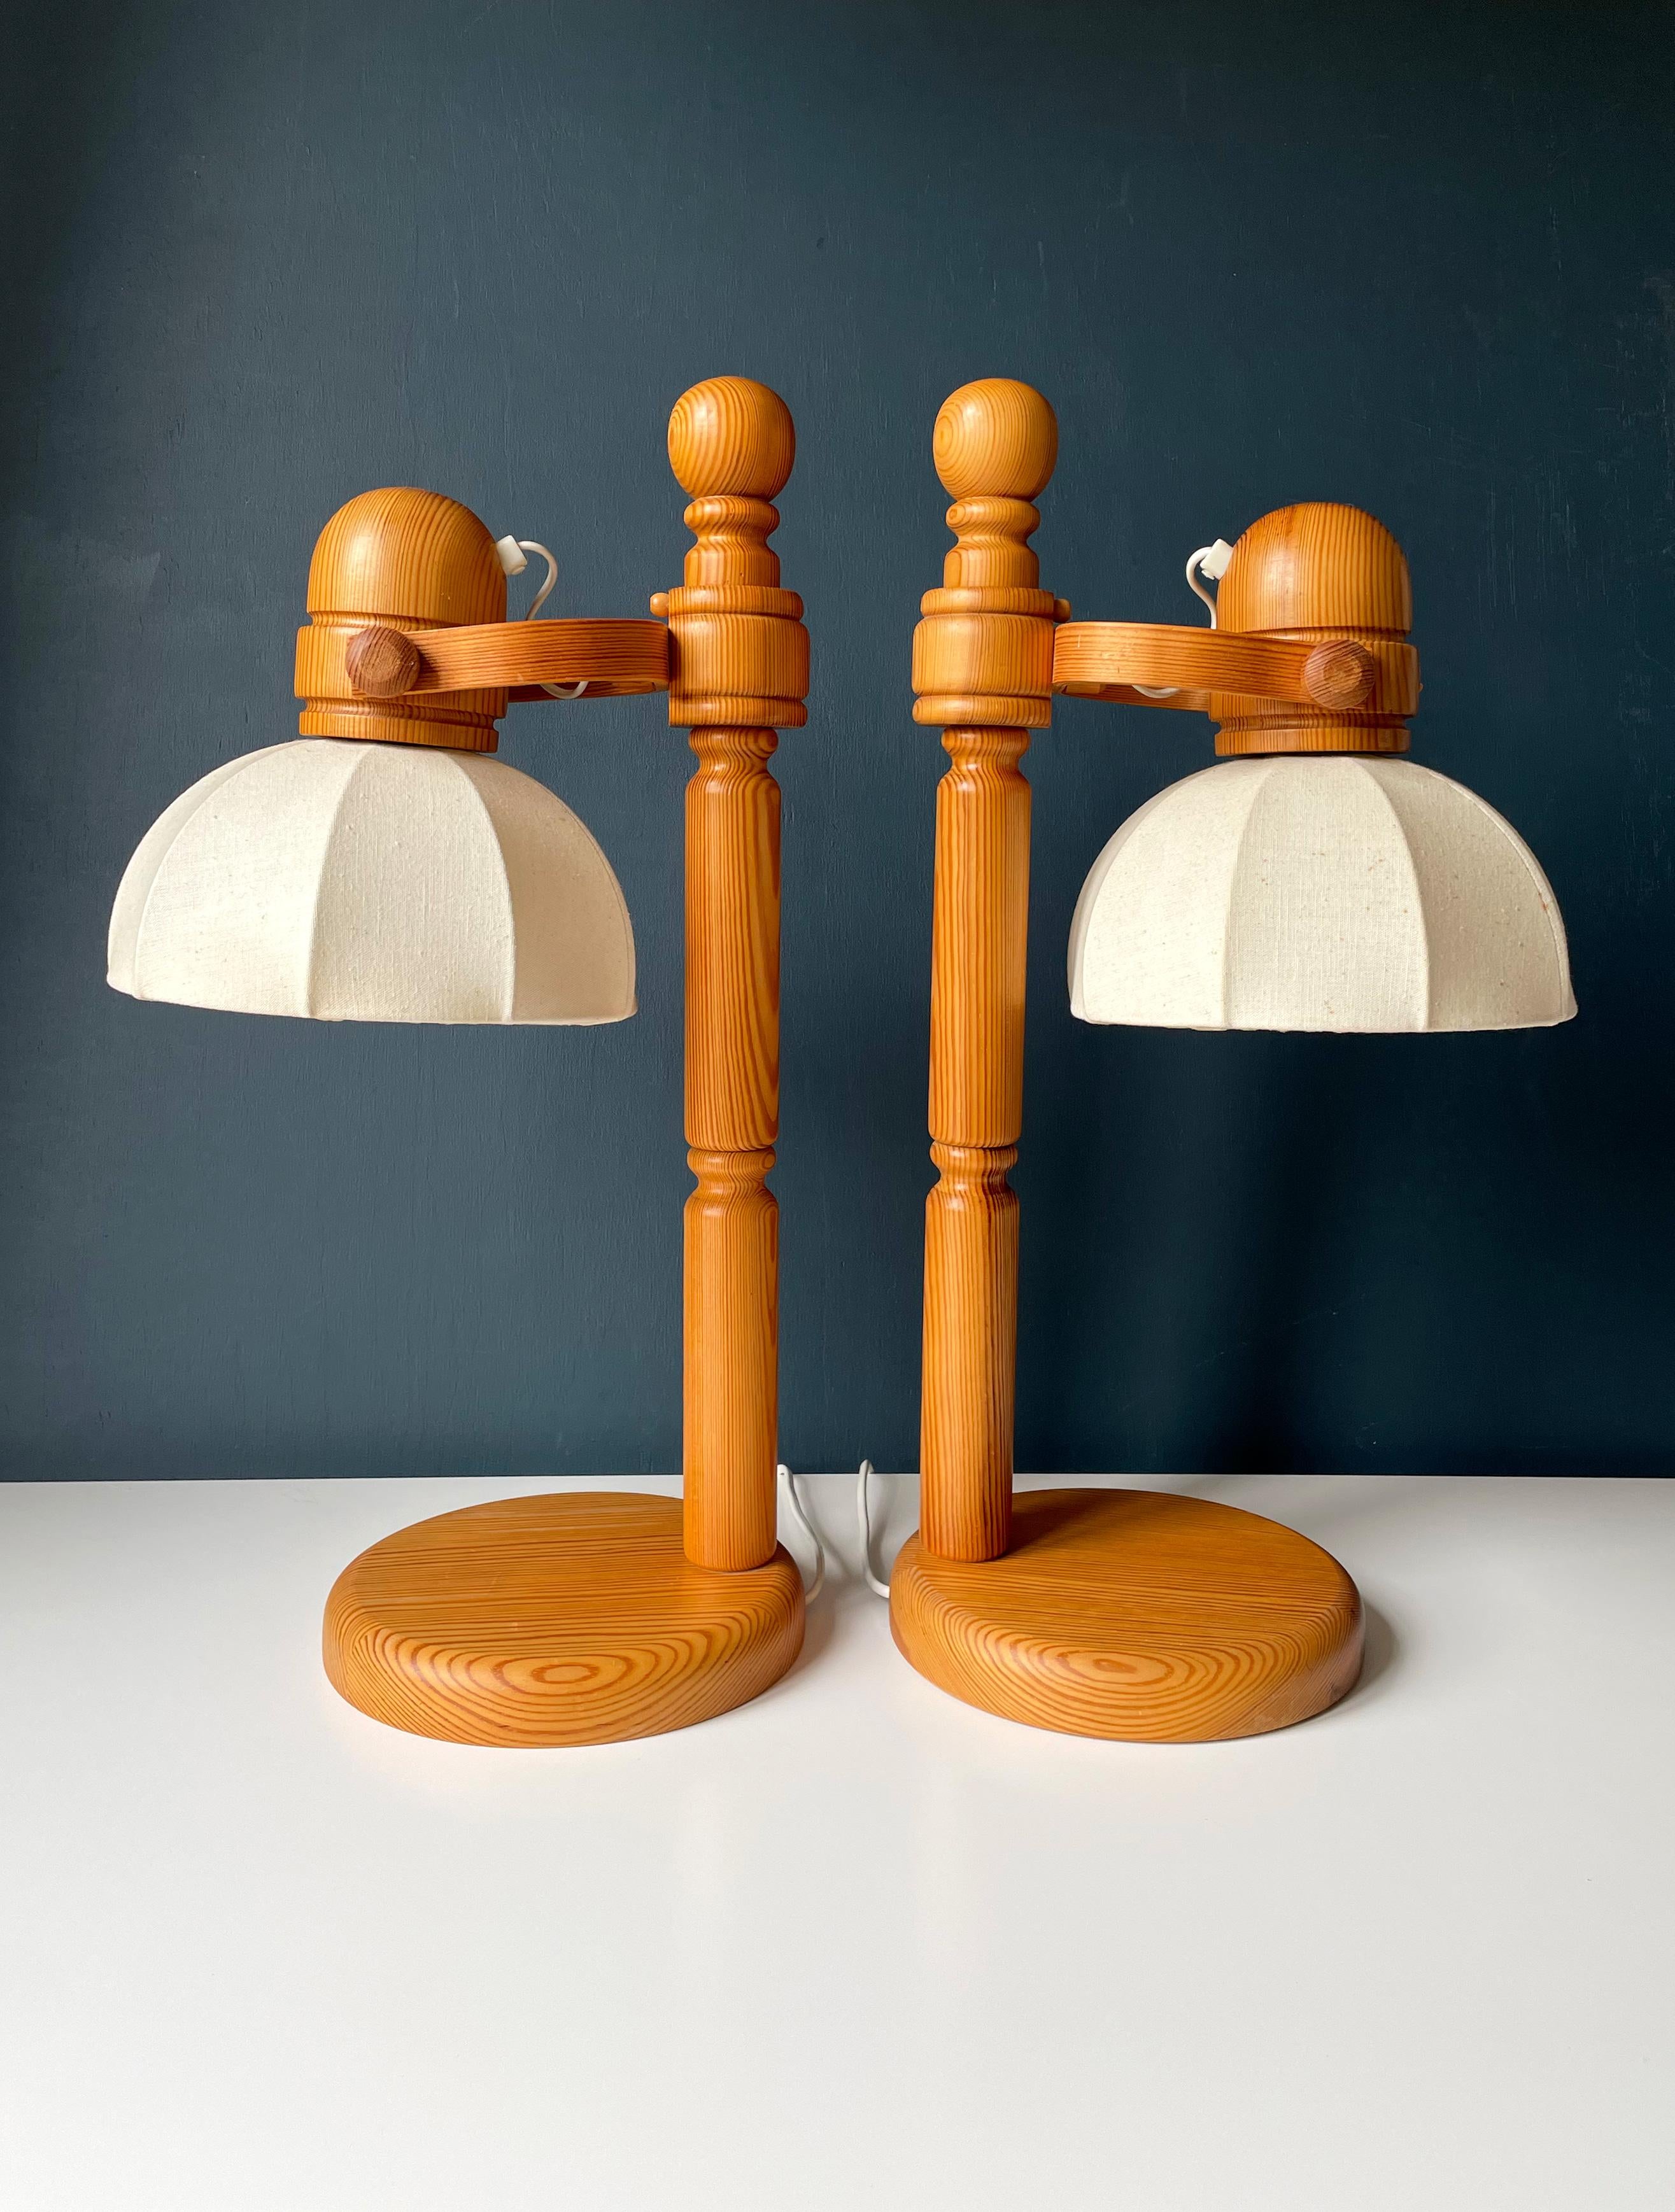 Pair of large Swedish Mid-Century Modern lacquered solid pine wood table lamps manufactured by Markslöjd in the 1960s. Turned soft rounded shapes and bentwood on the adjustable shade mount. Original cream white linen shade. E27 bulb max 60W. Label